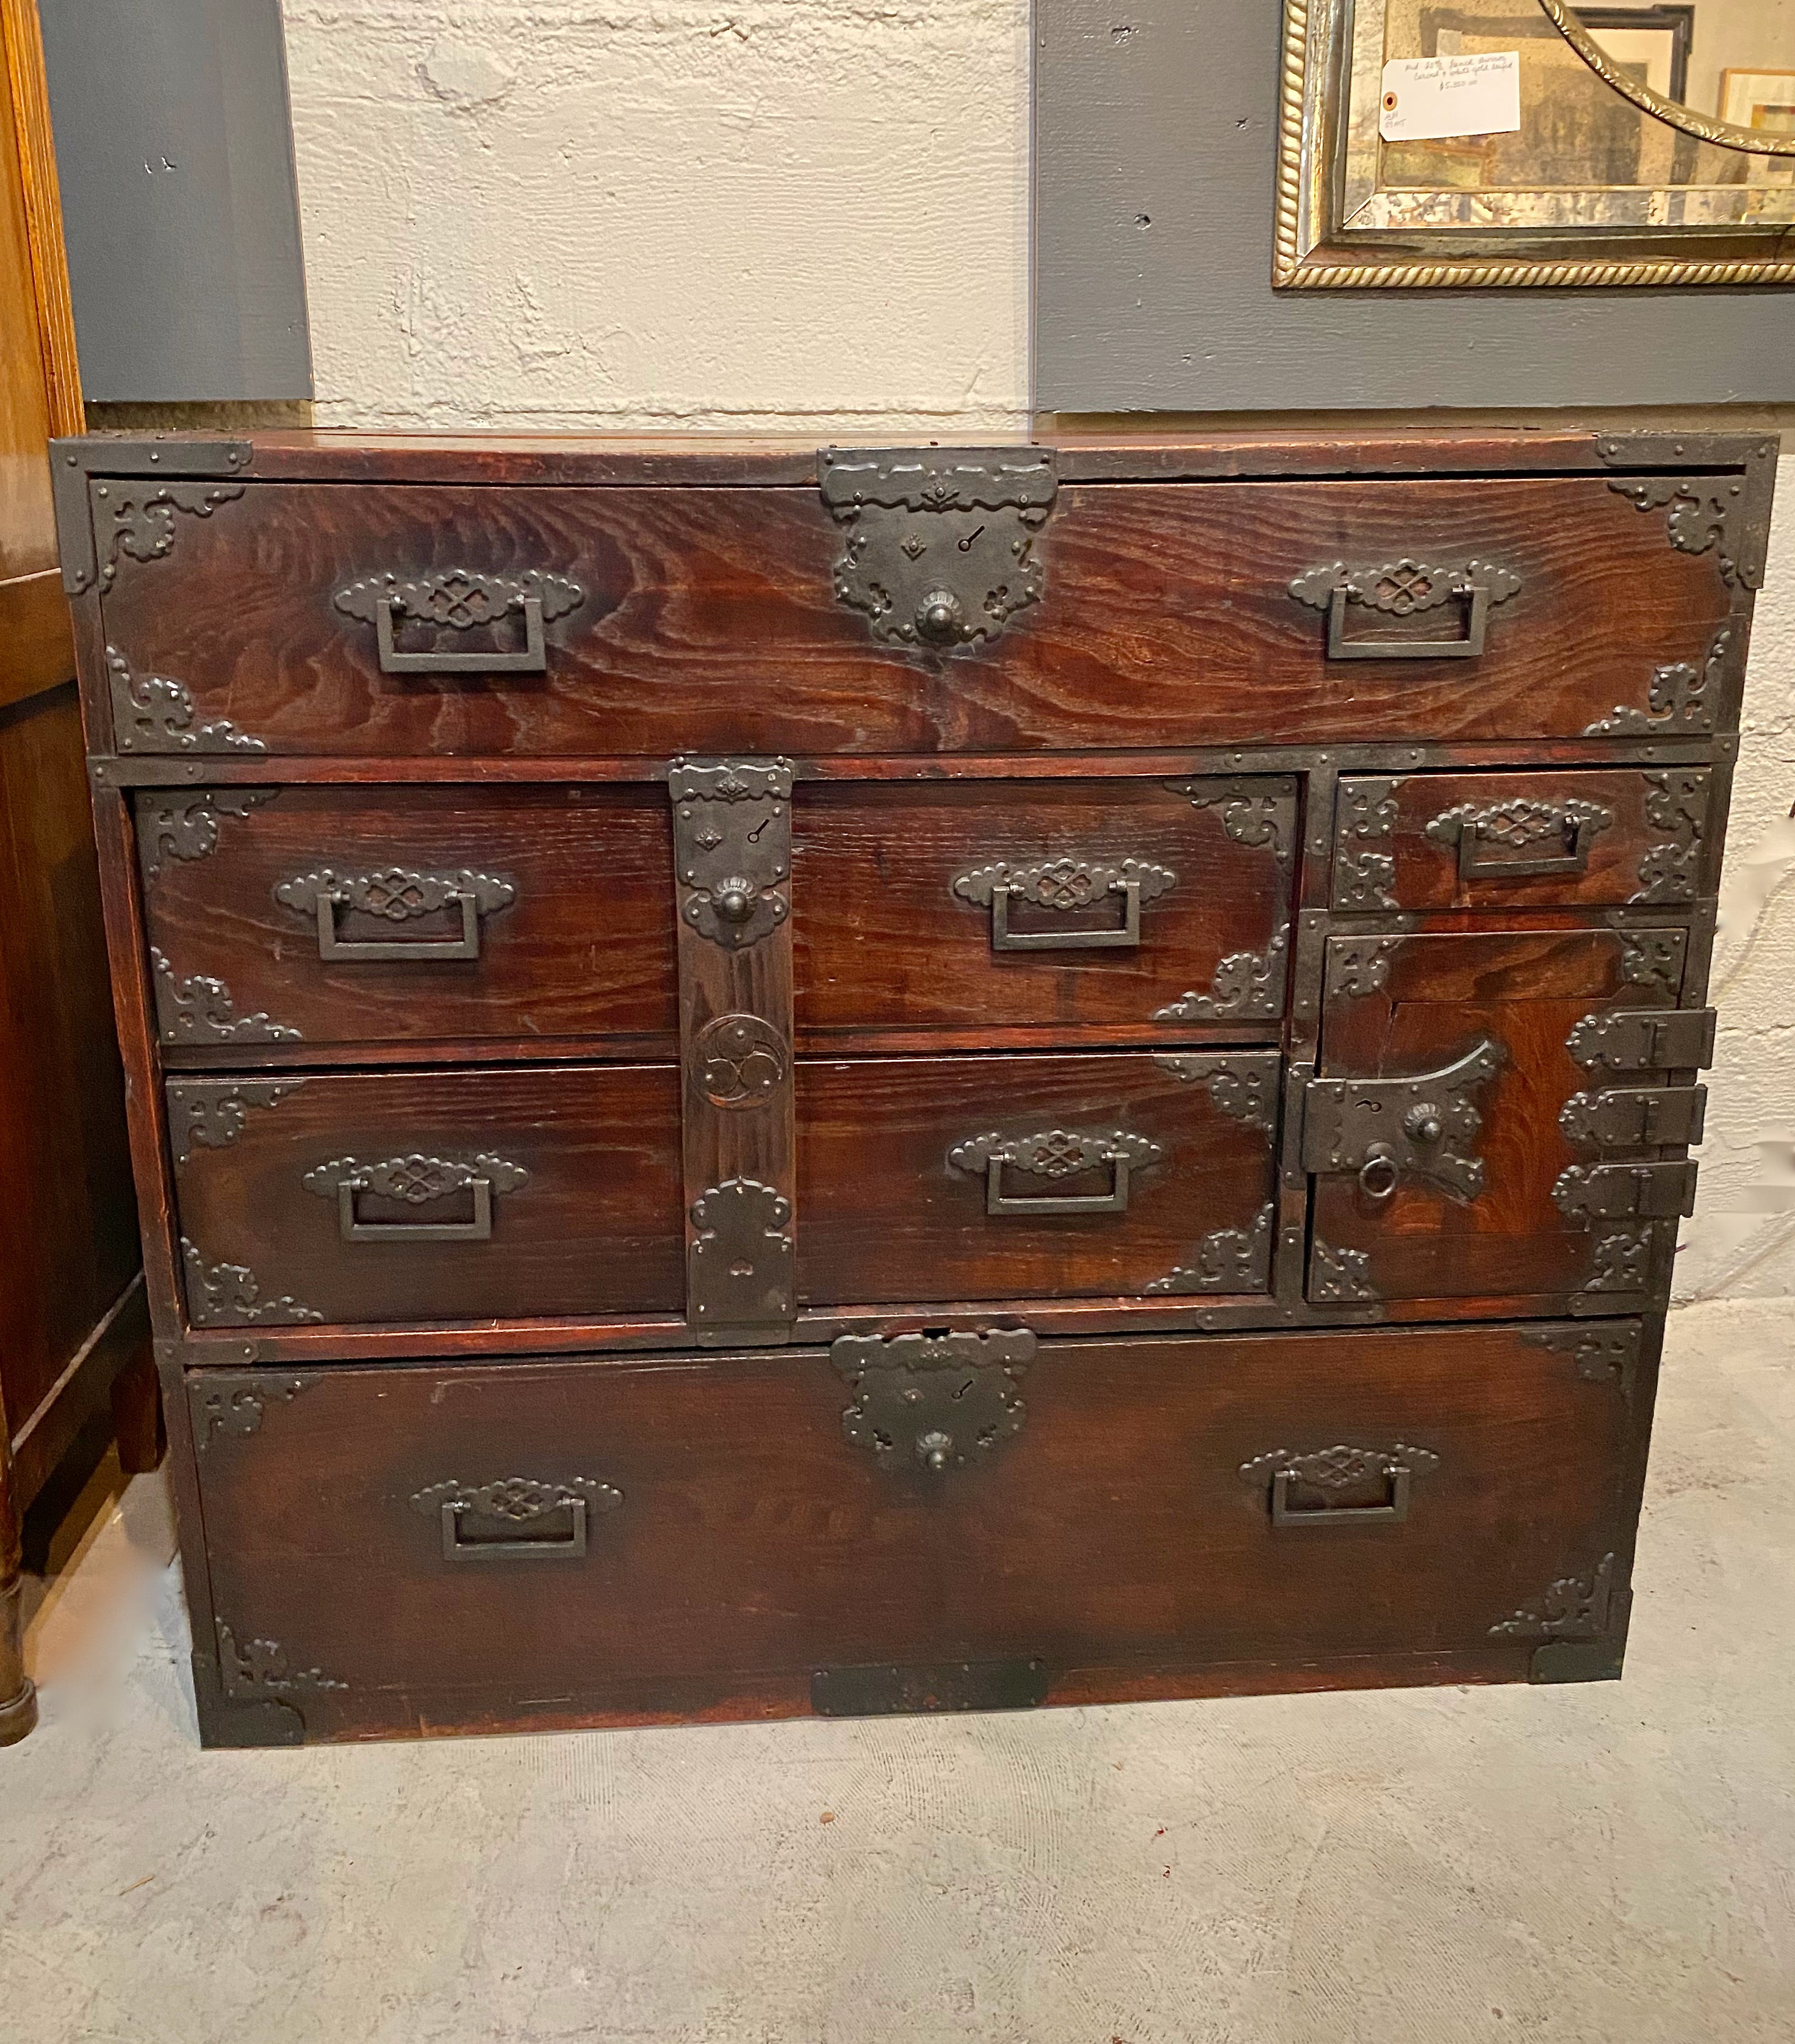 This is a very good example of a Meiji Period Sendai Tansu in Keyaki wood. This one-part tansu dates to circa 1880 and is in very good overall condition as it retains all of its original iron work, the front iron locking bar and hardware, plus its